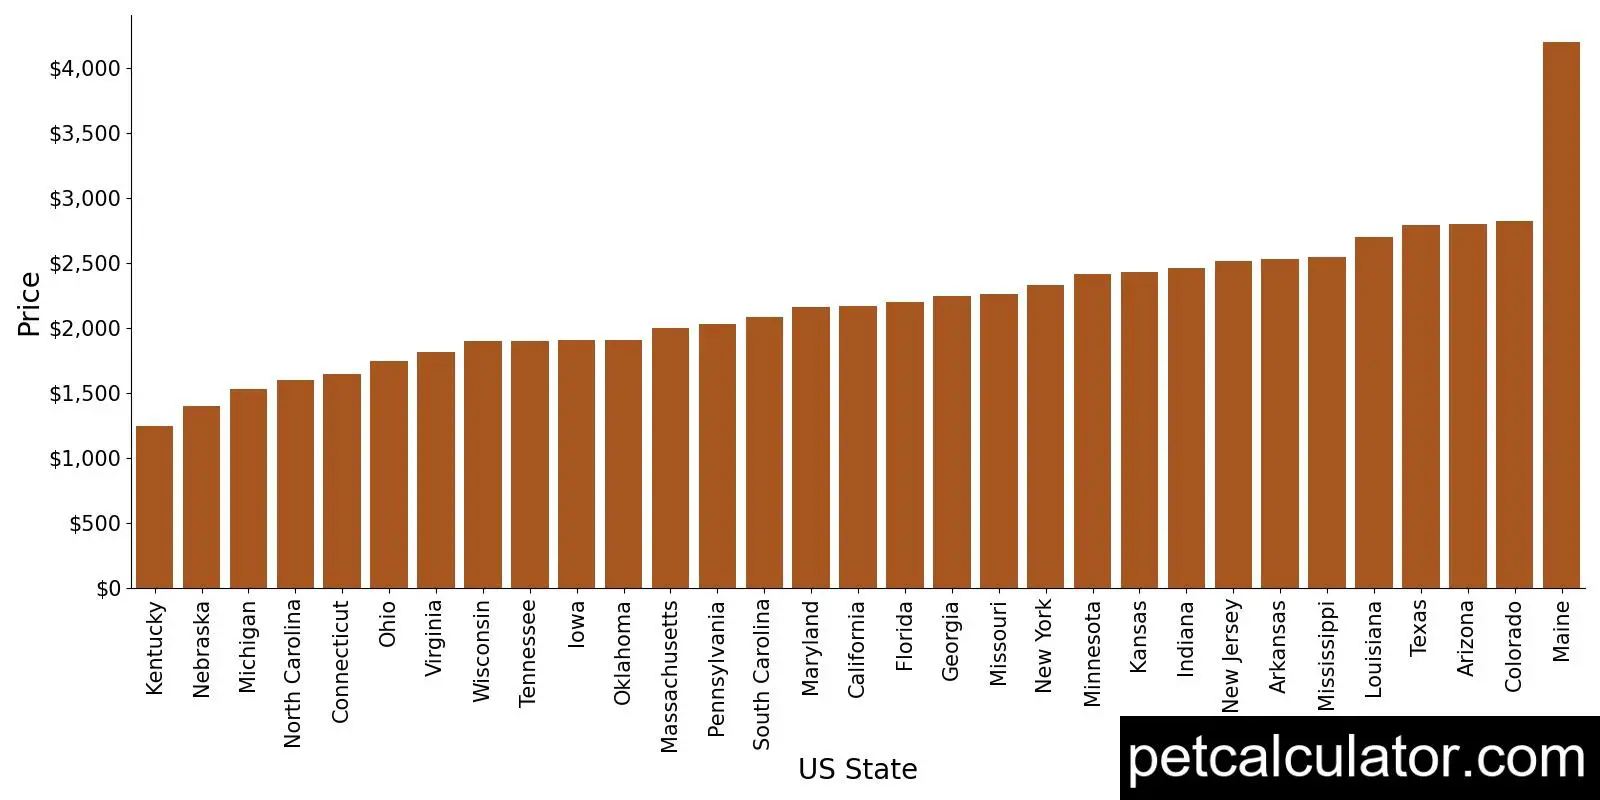 Price of Cavachon by US State 